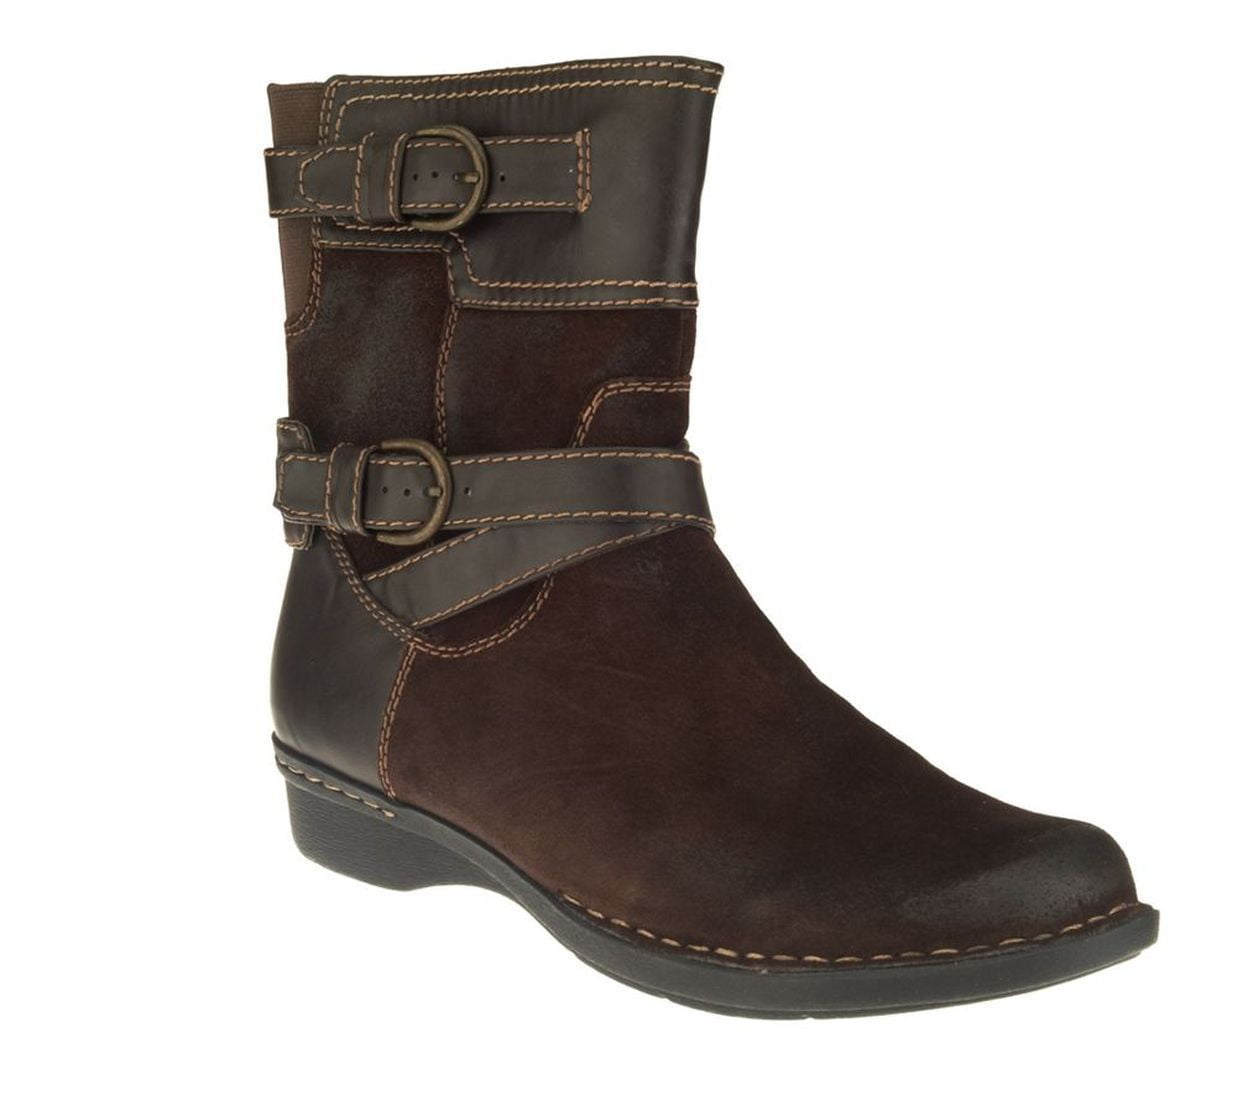 clarks suede ankle boots whistle ranch